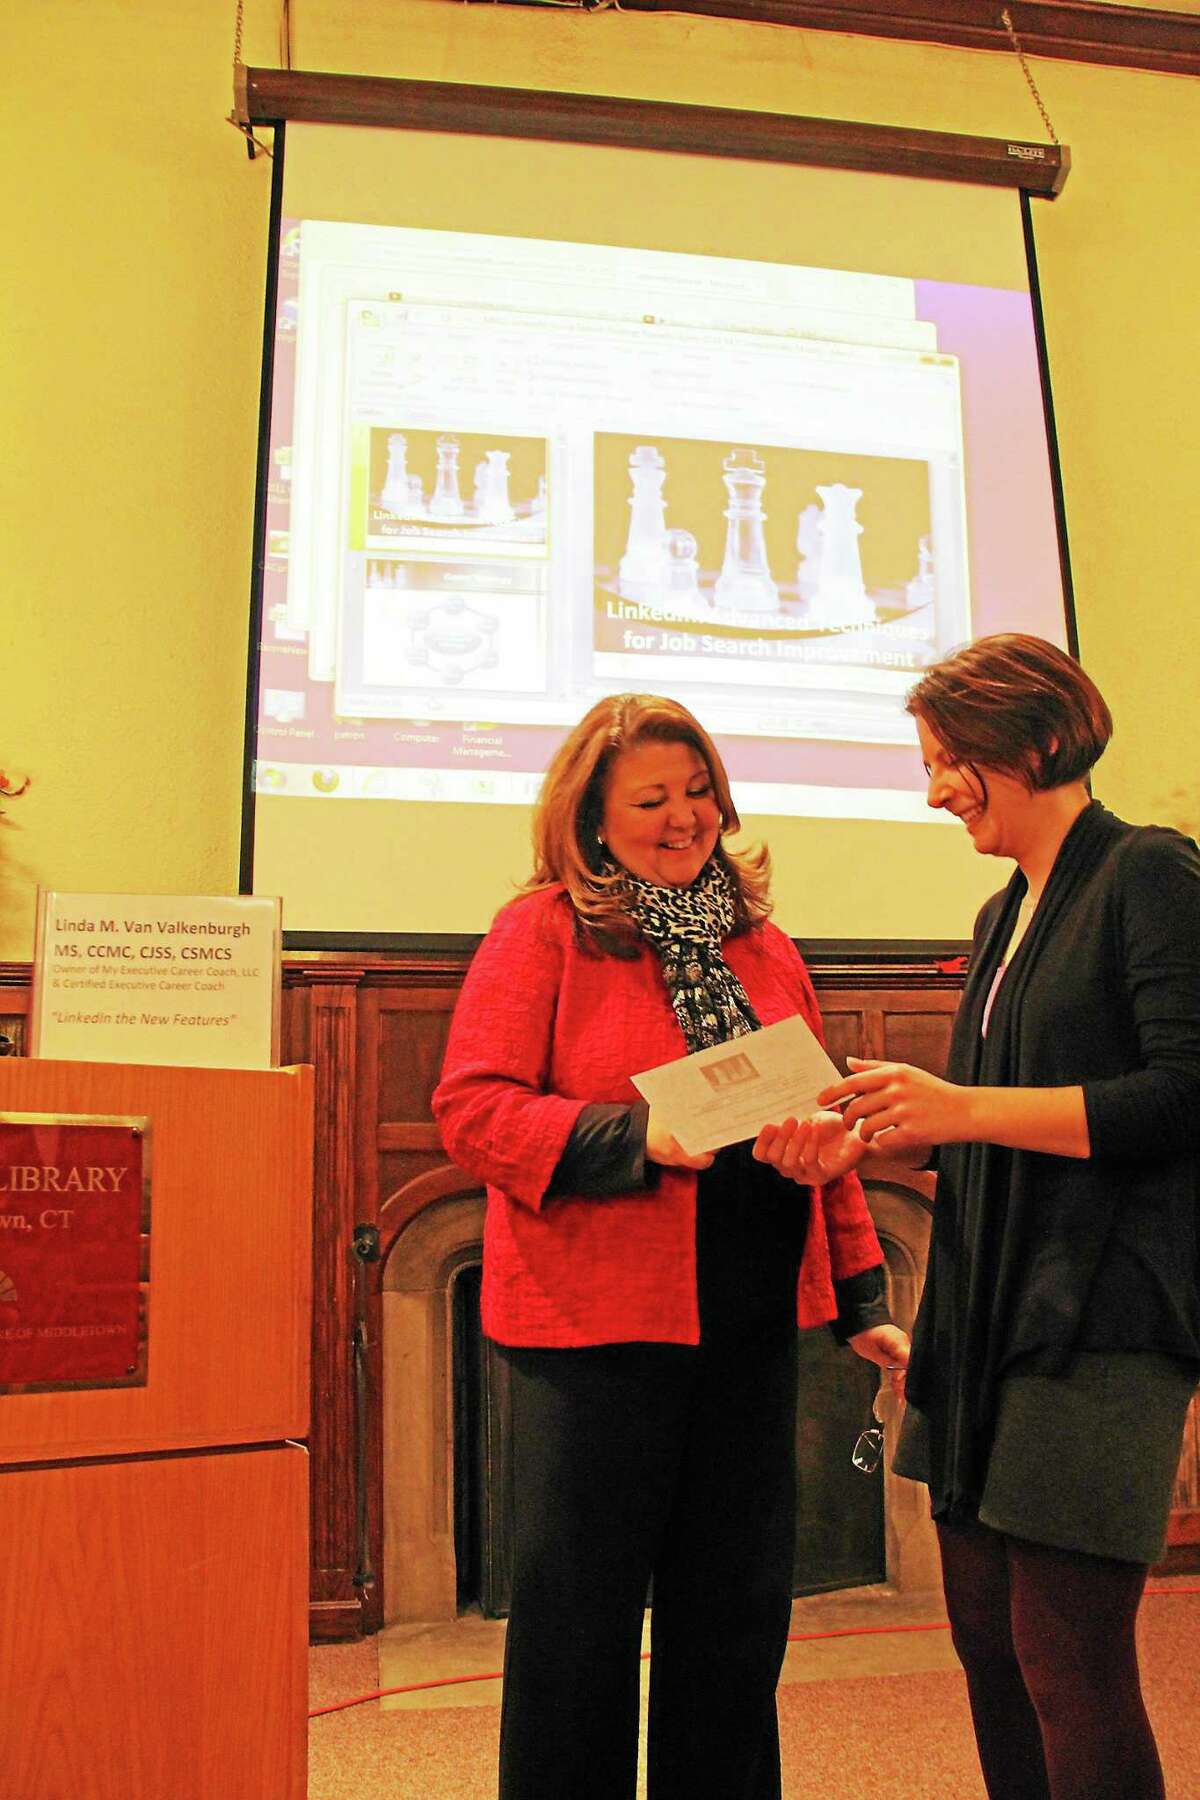 Linda Van Valkenburgh, left, reviews her agenda with Lindsay Riordan, Russell Library’s business and career resources librarian.